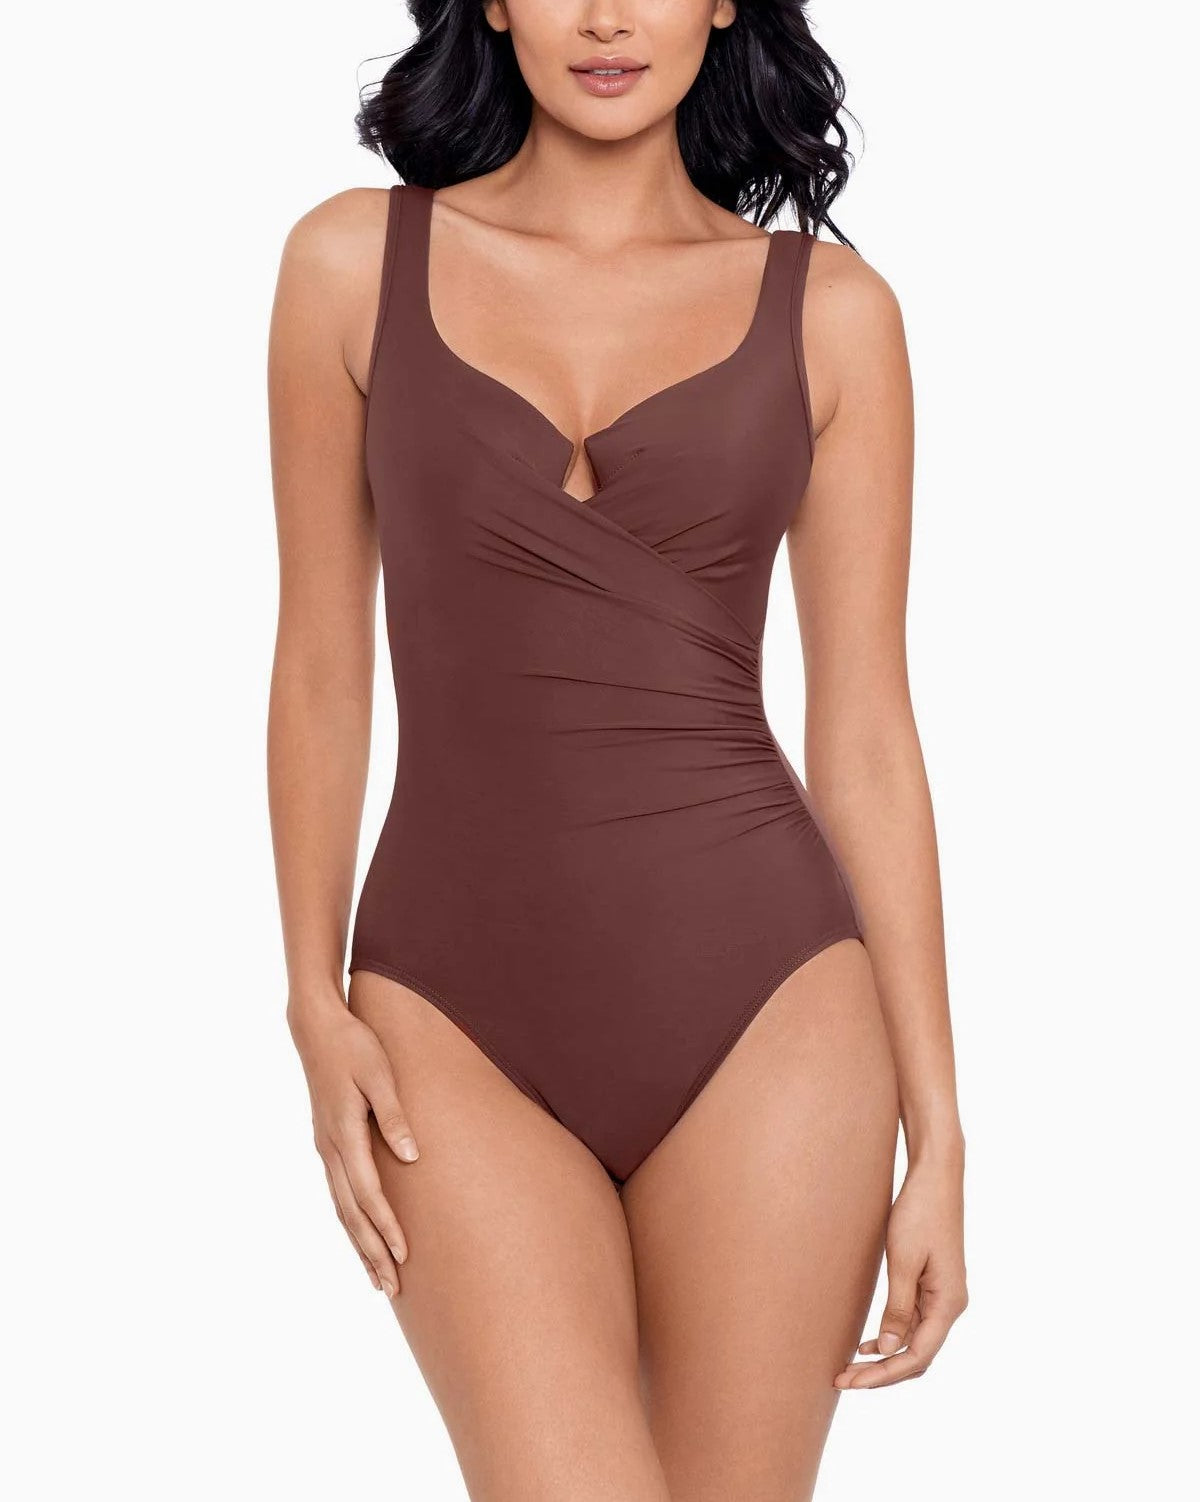 Must Have Escape In Tamarind Brown - Costume Miracle